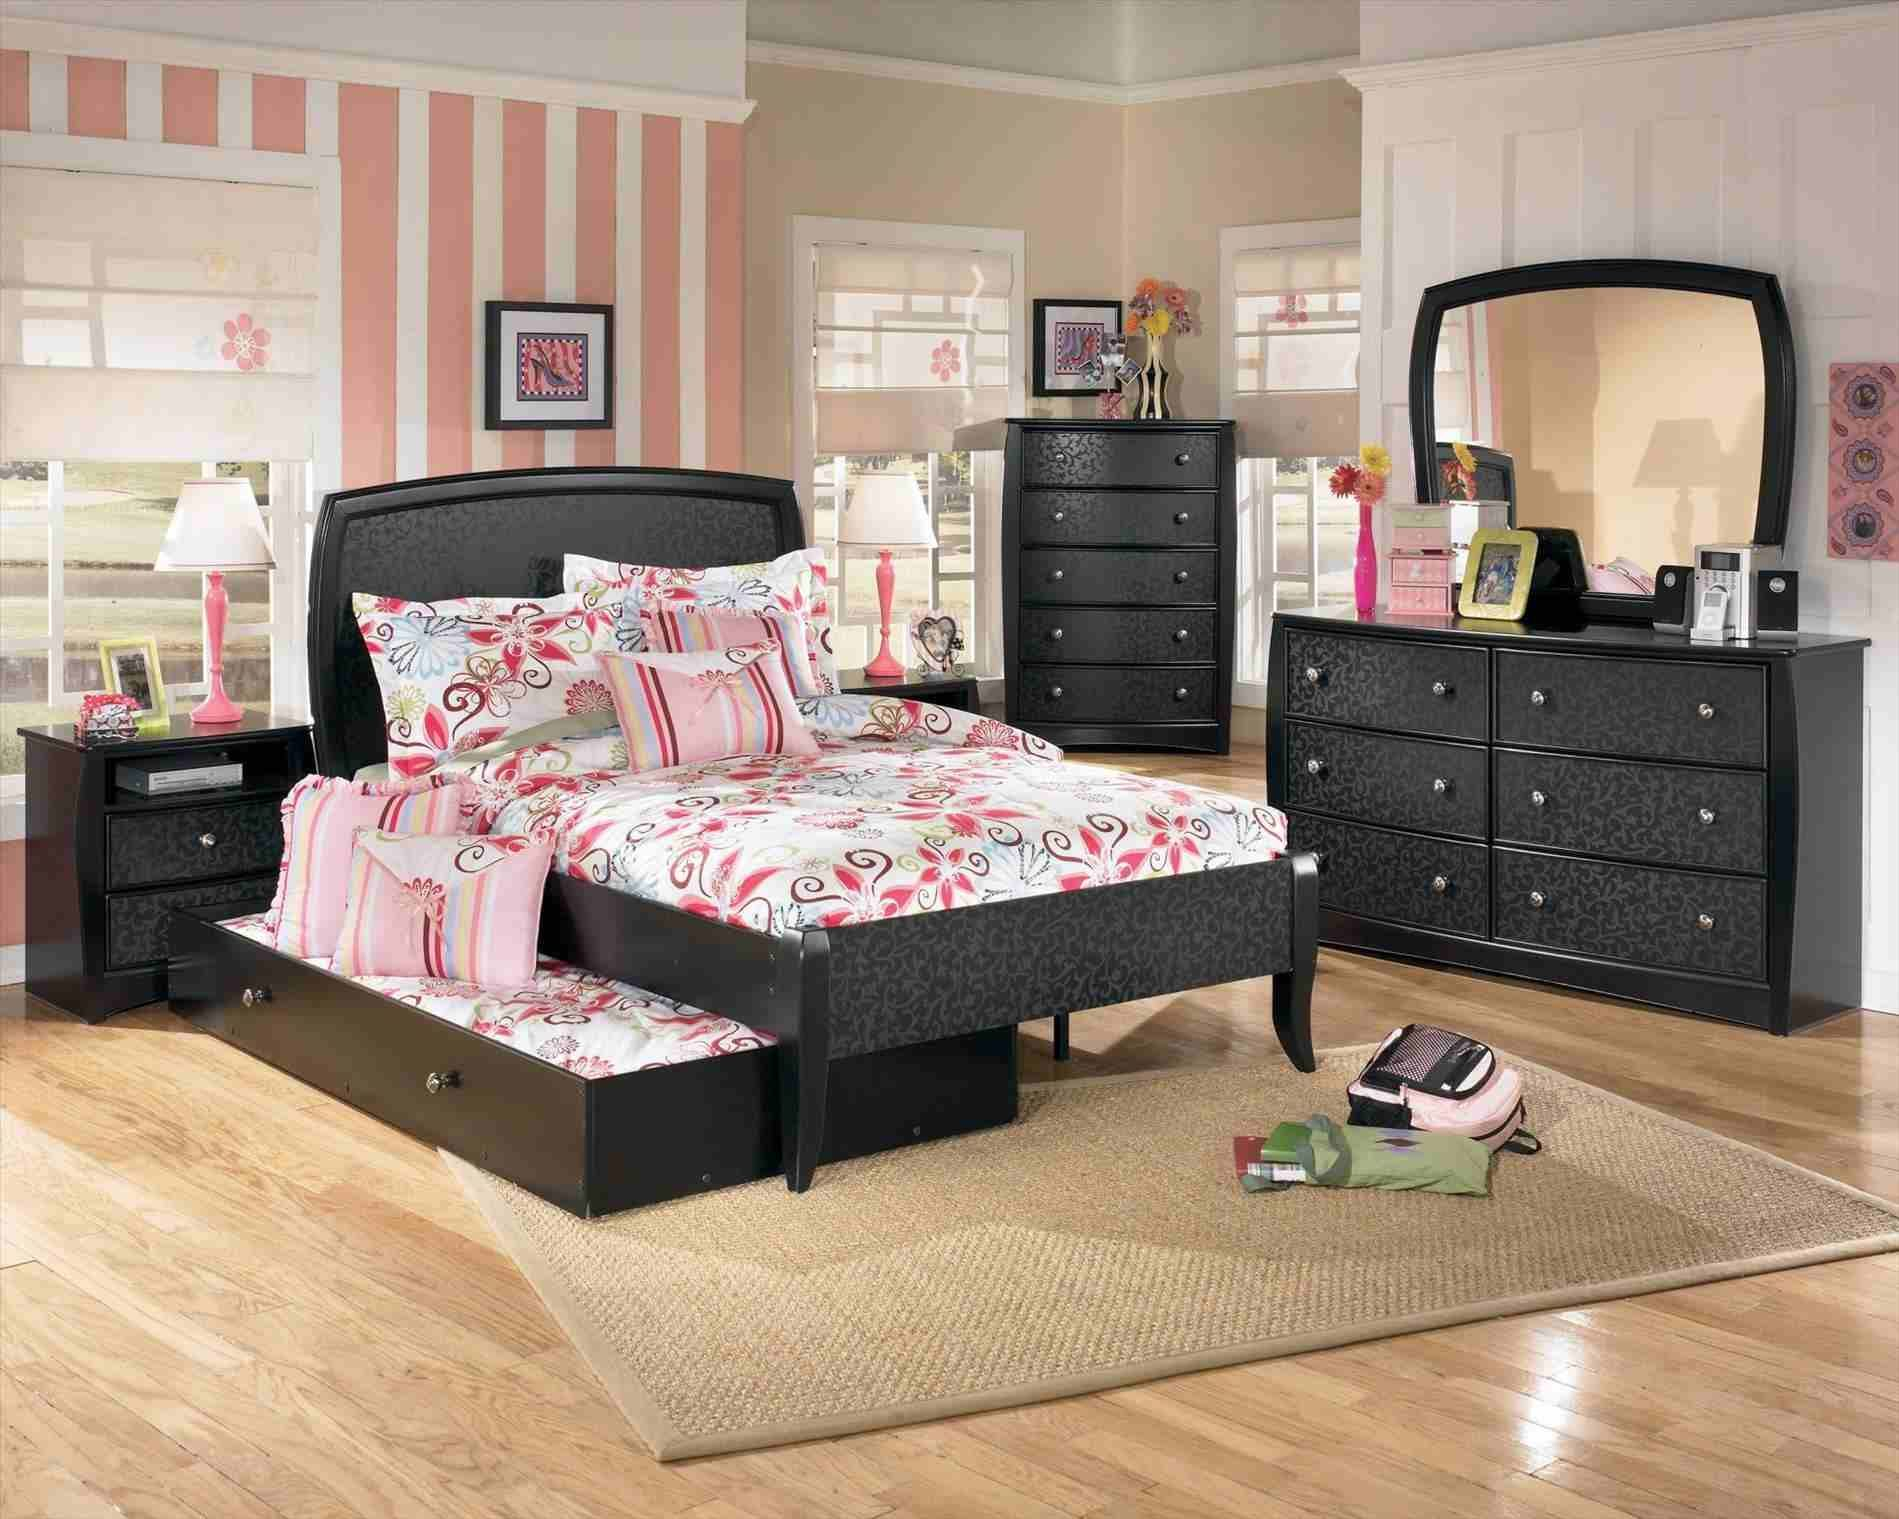 Bedrooms Sets For Girls Full Image For Cute Bedroom Sets 98 intended for sizing 1899 X 1519